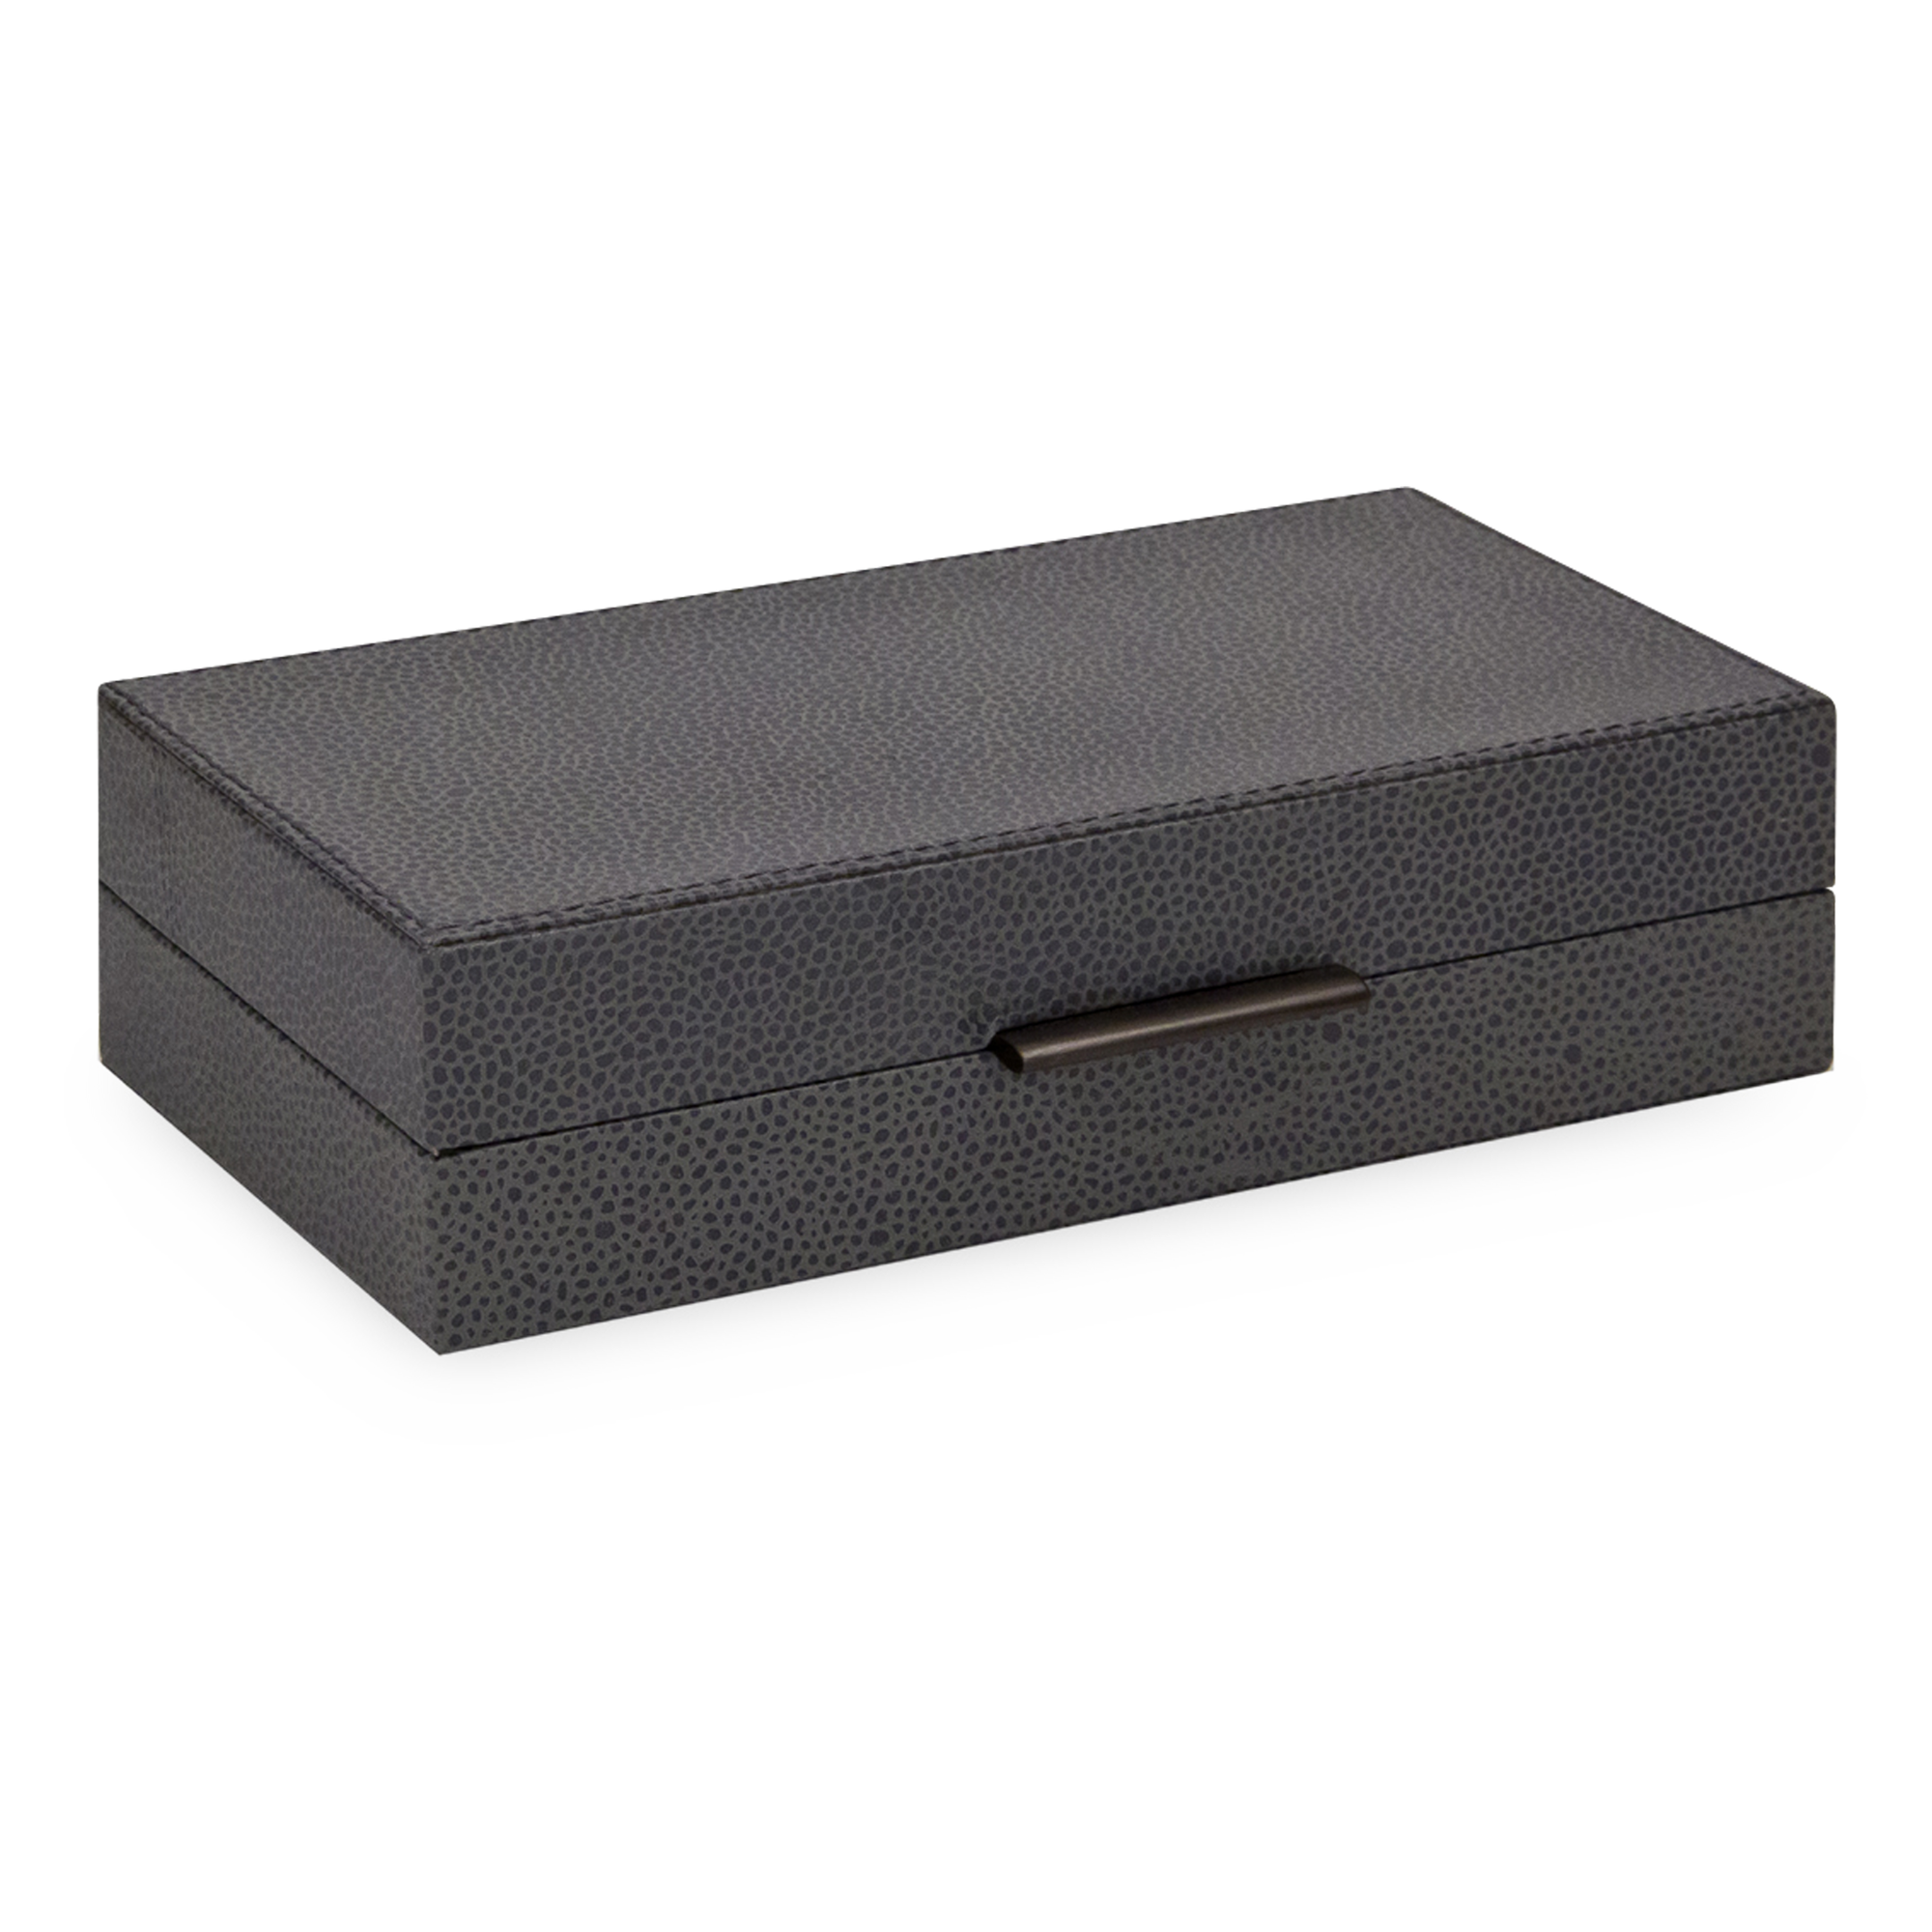 The perfect subtle graining of leather and understated bronze slim knobs provide fantastic complements for the stylish grey interior and smooth suede bases of these boxes.